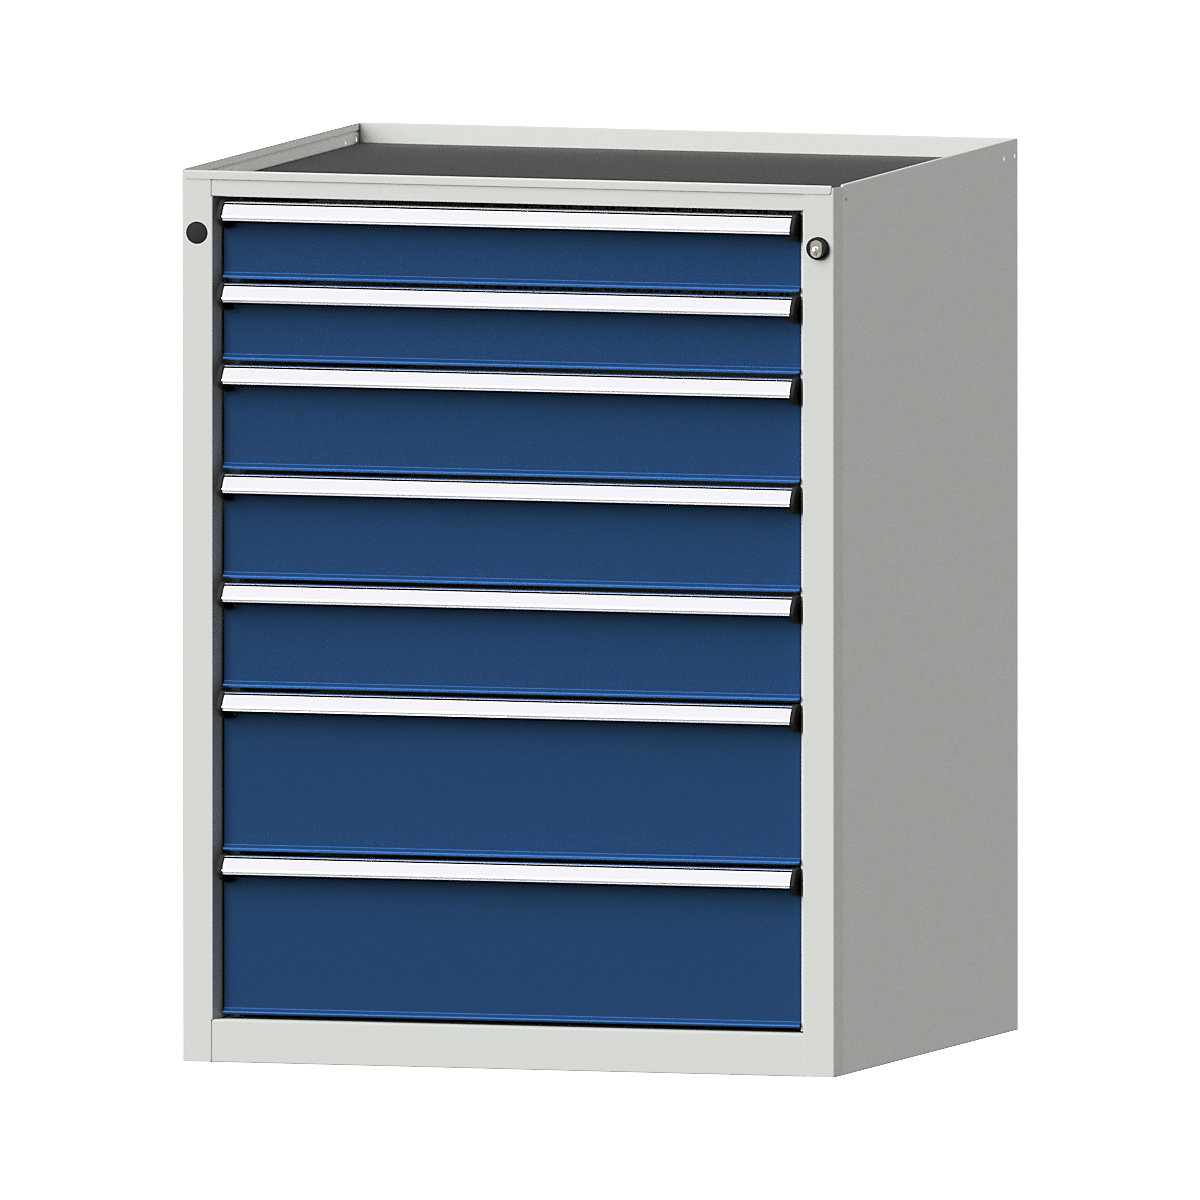 Drawer cupboard – ANKE, WxD 760 x 675 mm, 7 drawers, height 980 mm, front in gentian blue-10